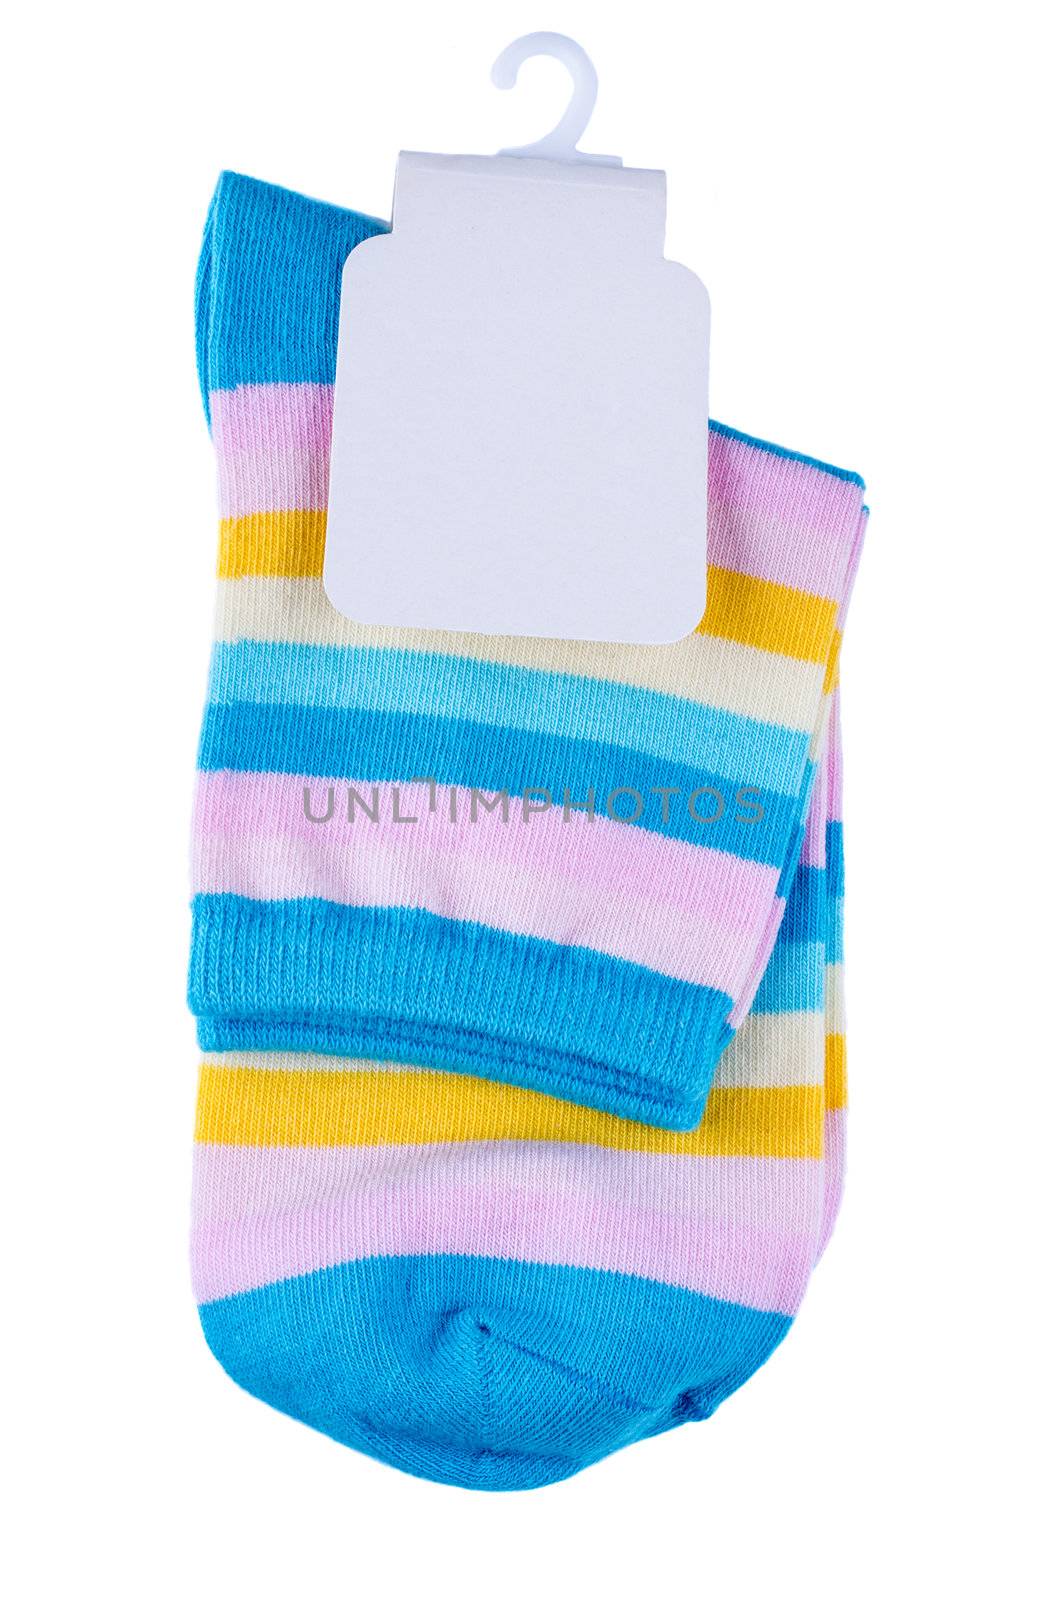 Multicolored striped socks with tag isolated